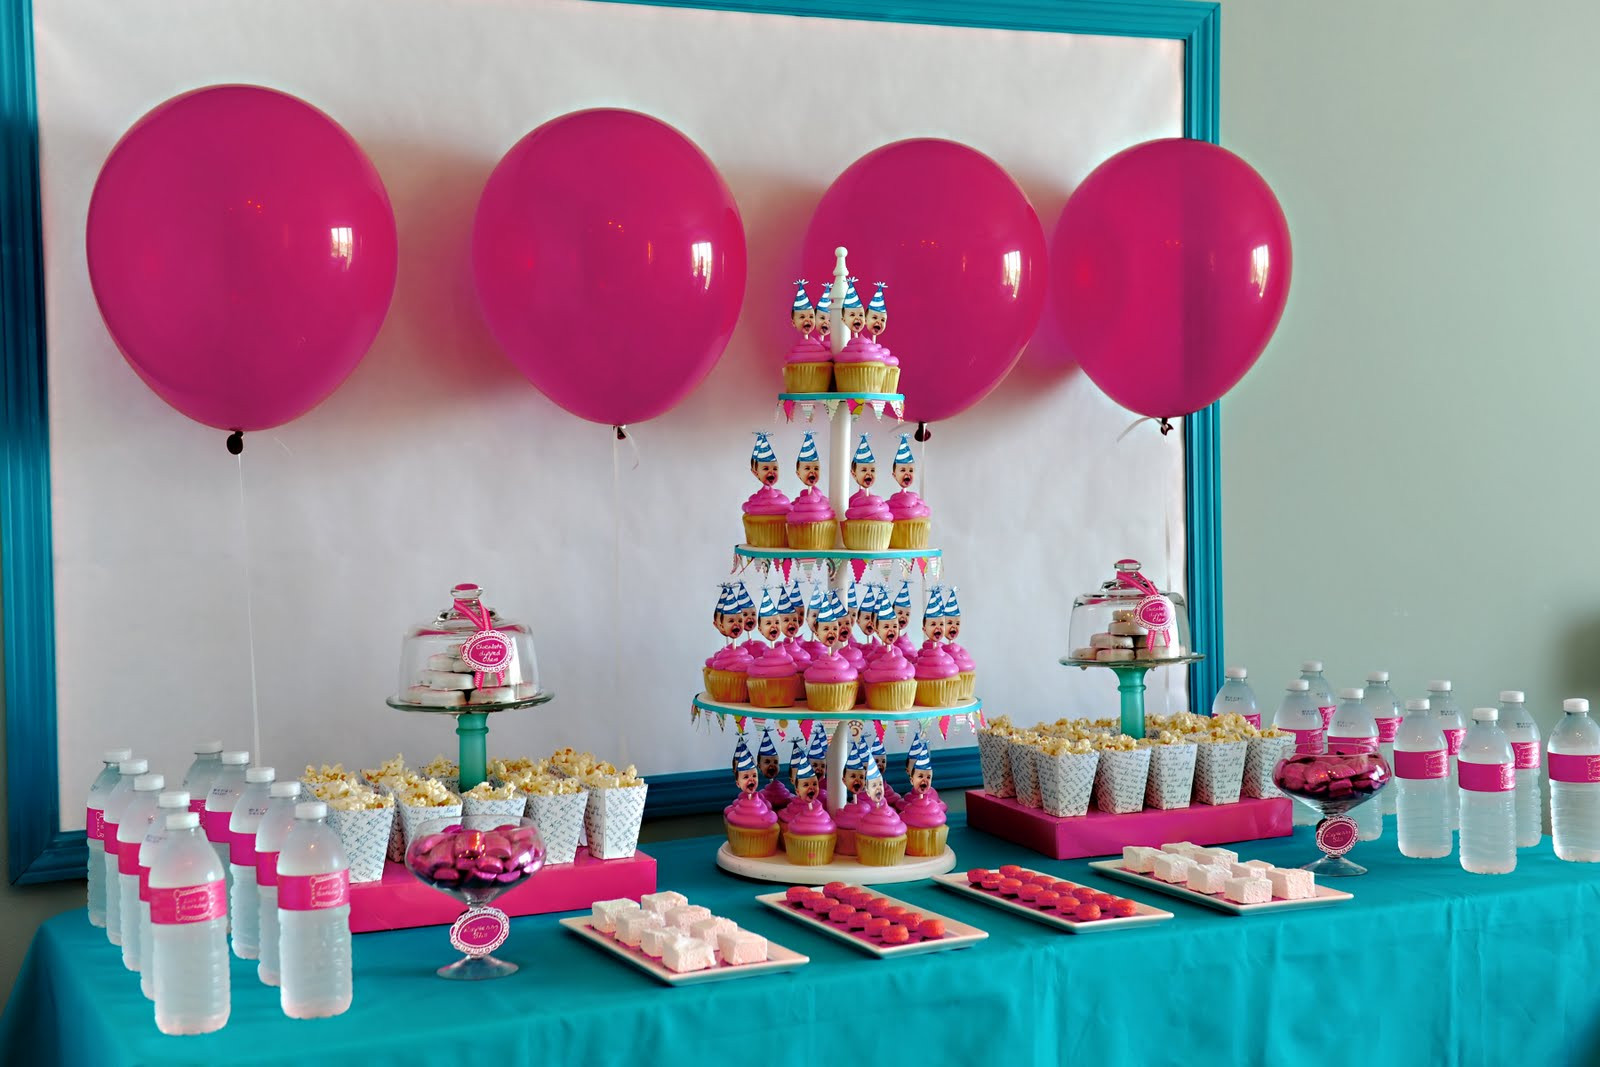 Birthday Party Ideas For 10 Year Old Girl
 Elle Belle Creative e Year Old in a Flash The Dessert